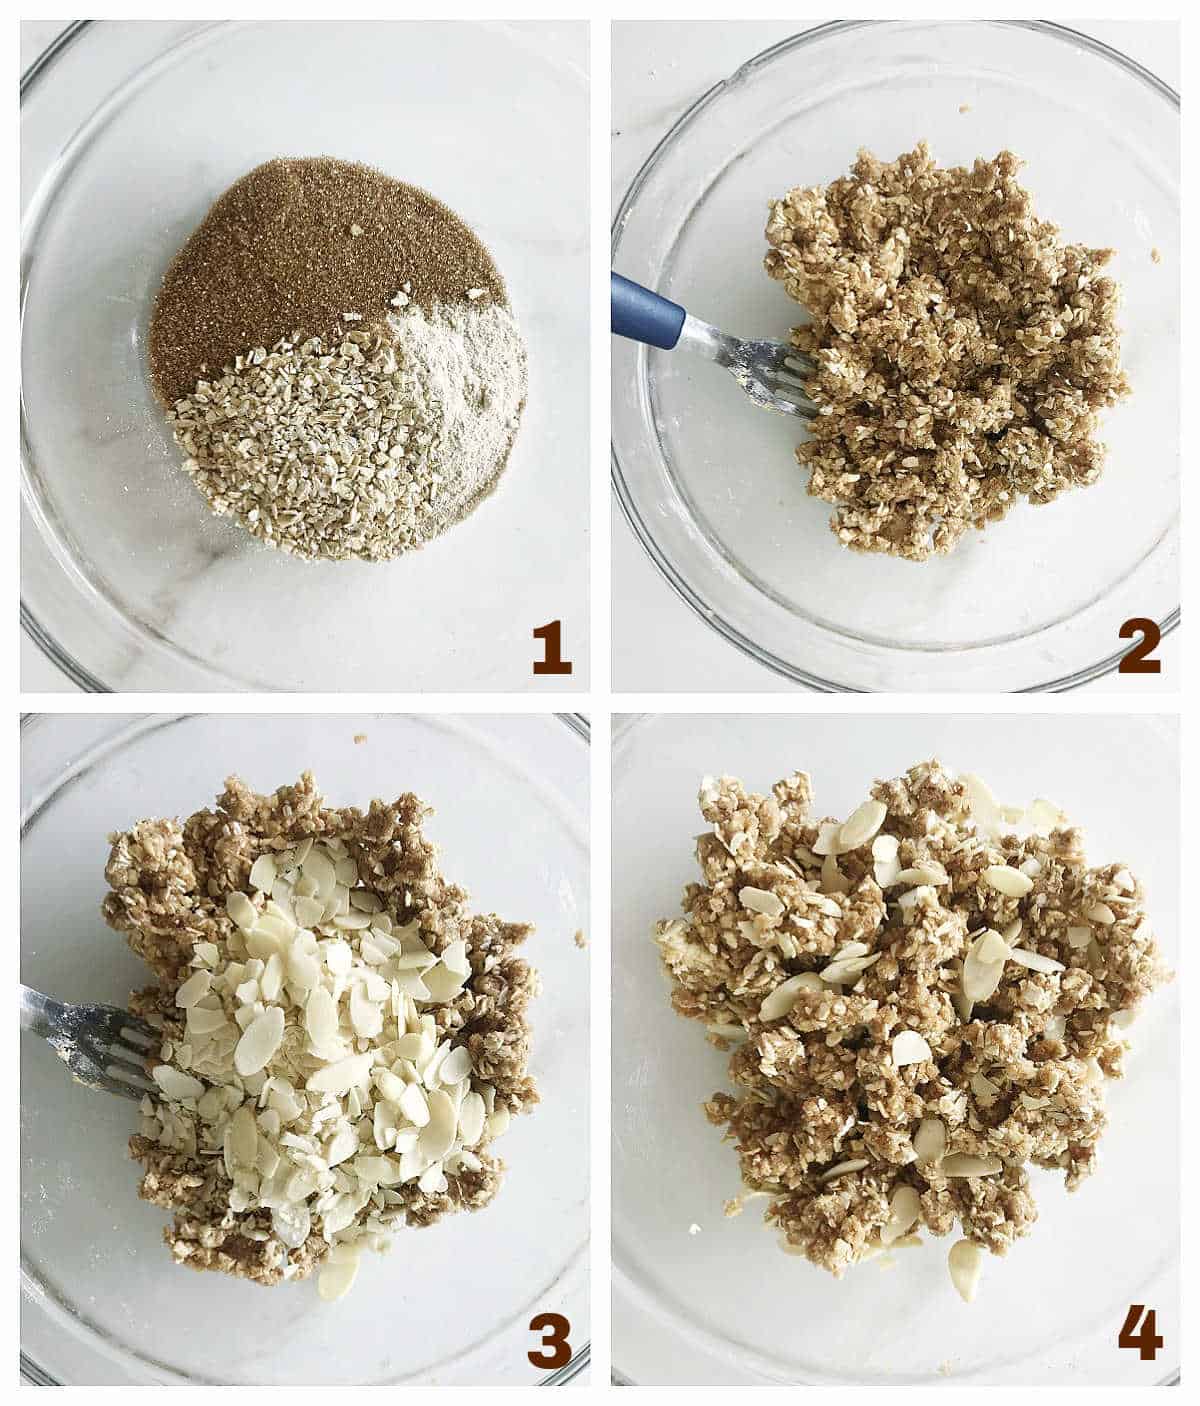 Collage showing process for making crumble with oats and brown sugar